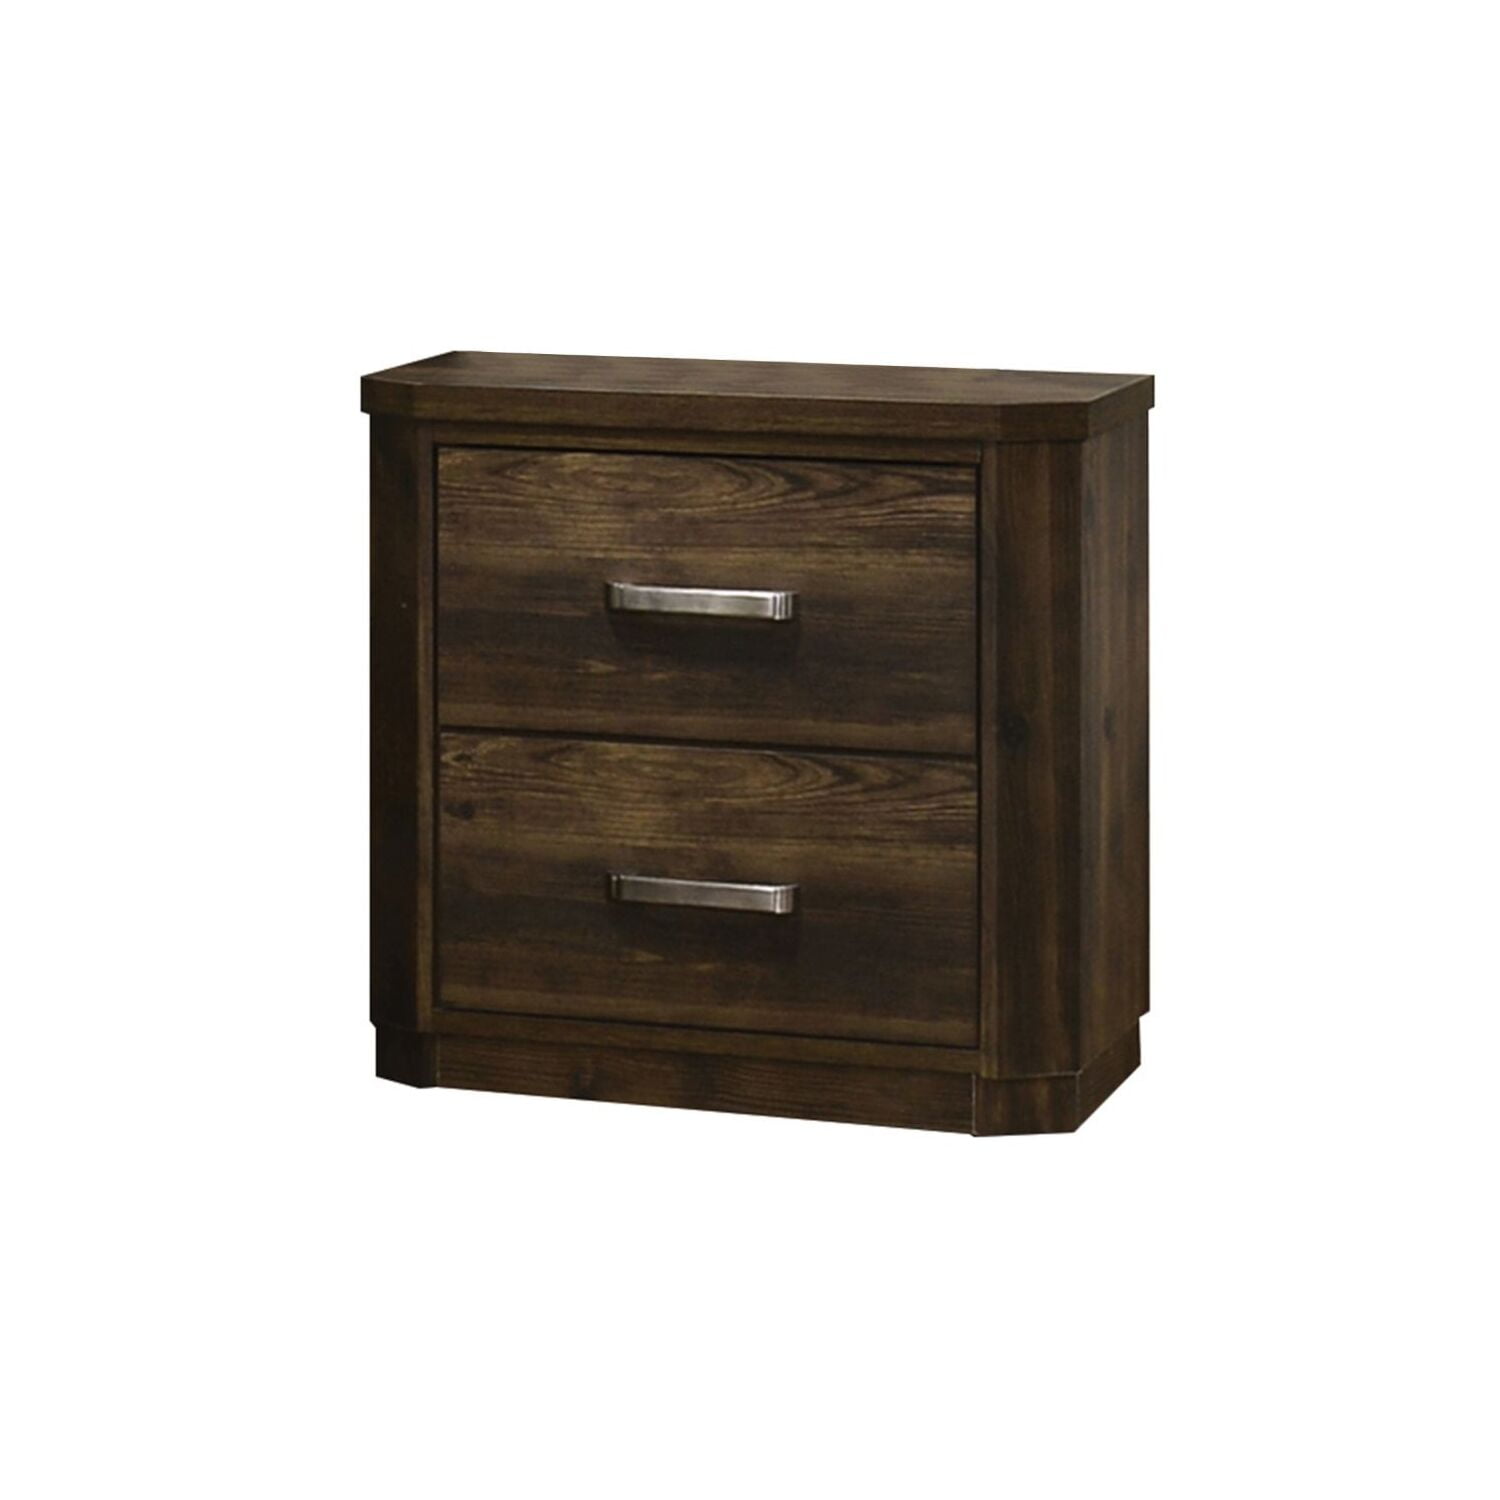 Picture of Acme Furniture 24853 24 x 16 x 24 in. Elettra 2 Drawer Nightstand, Rustic Walnut